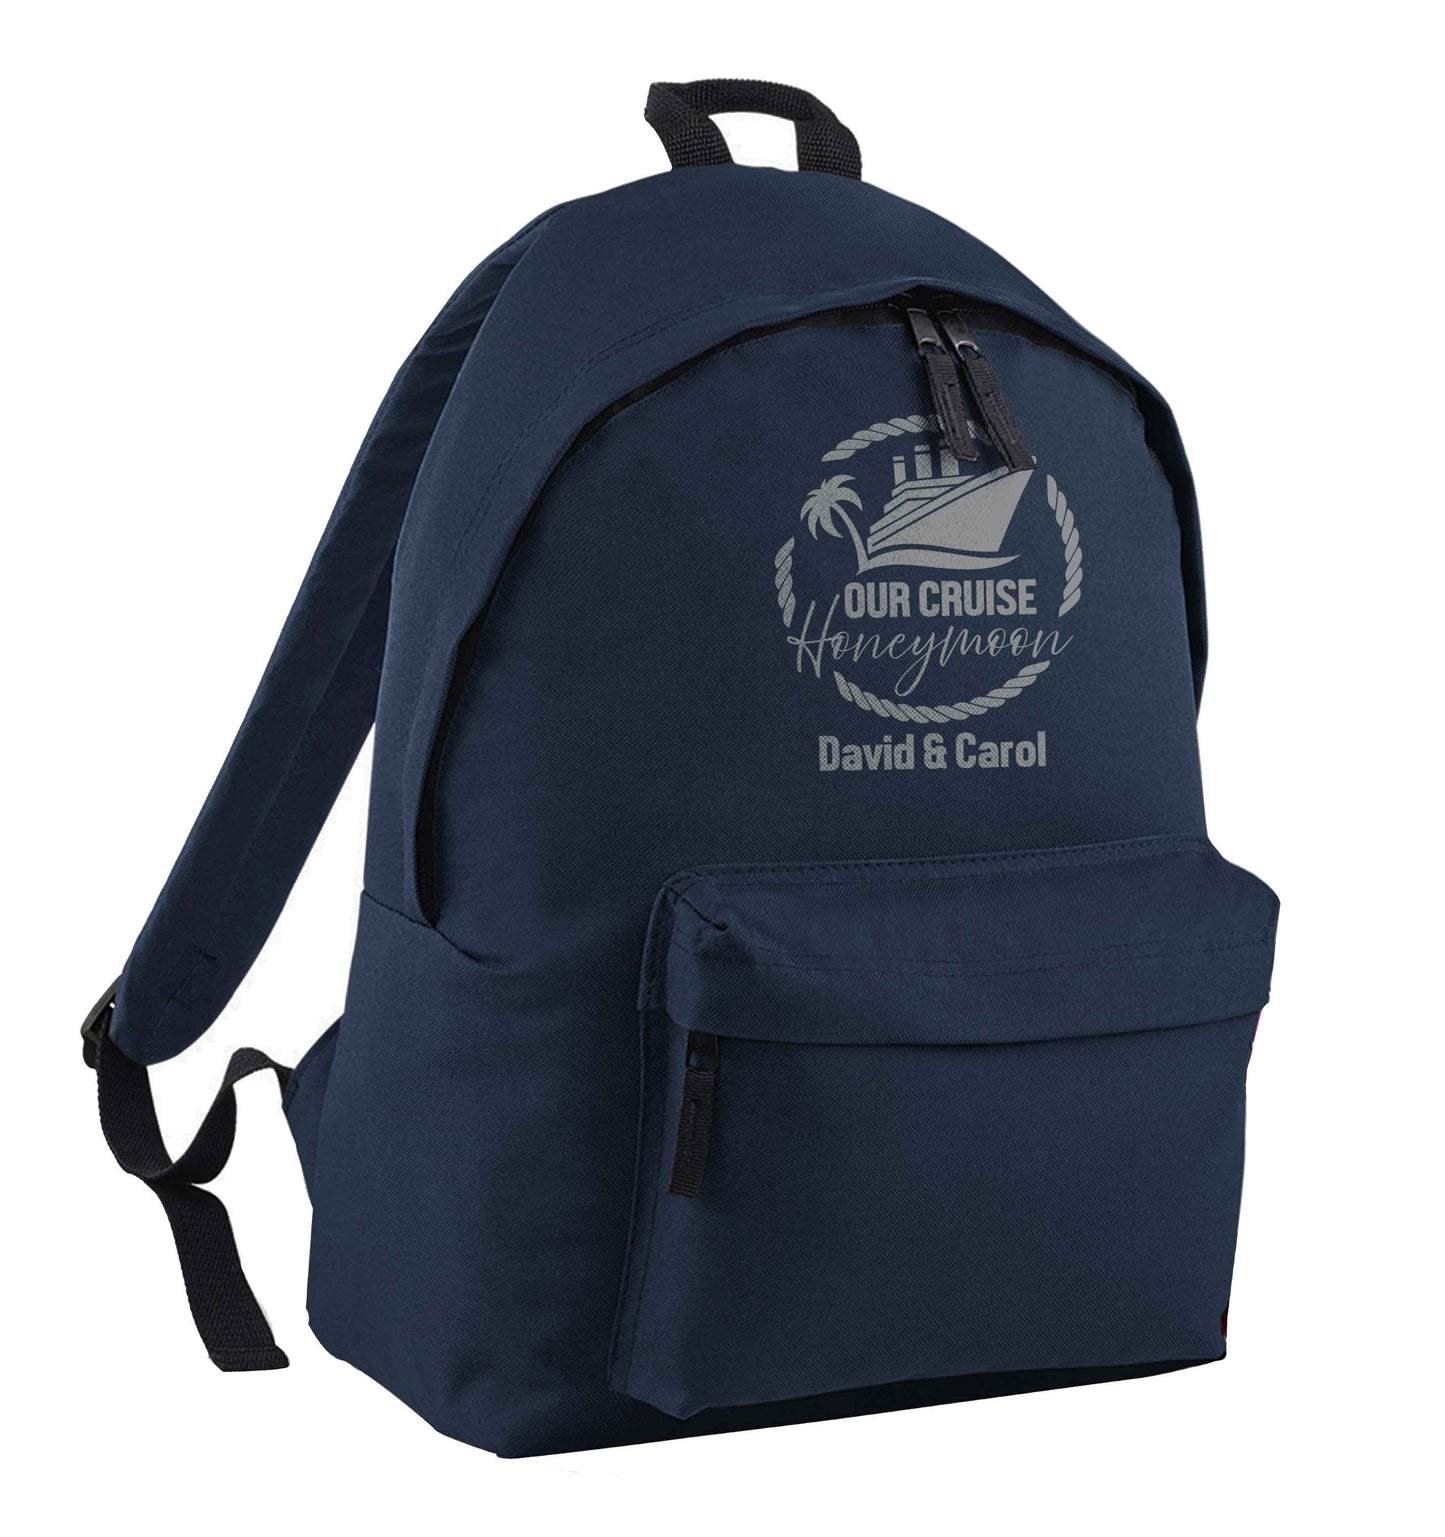 Our cruise honeymoon personalised navy adults backpack